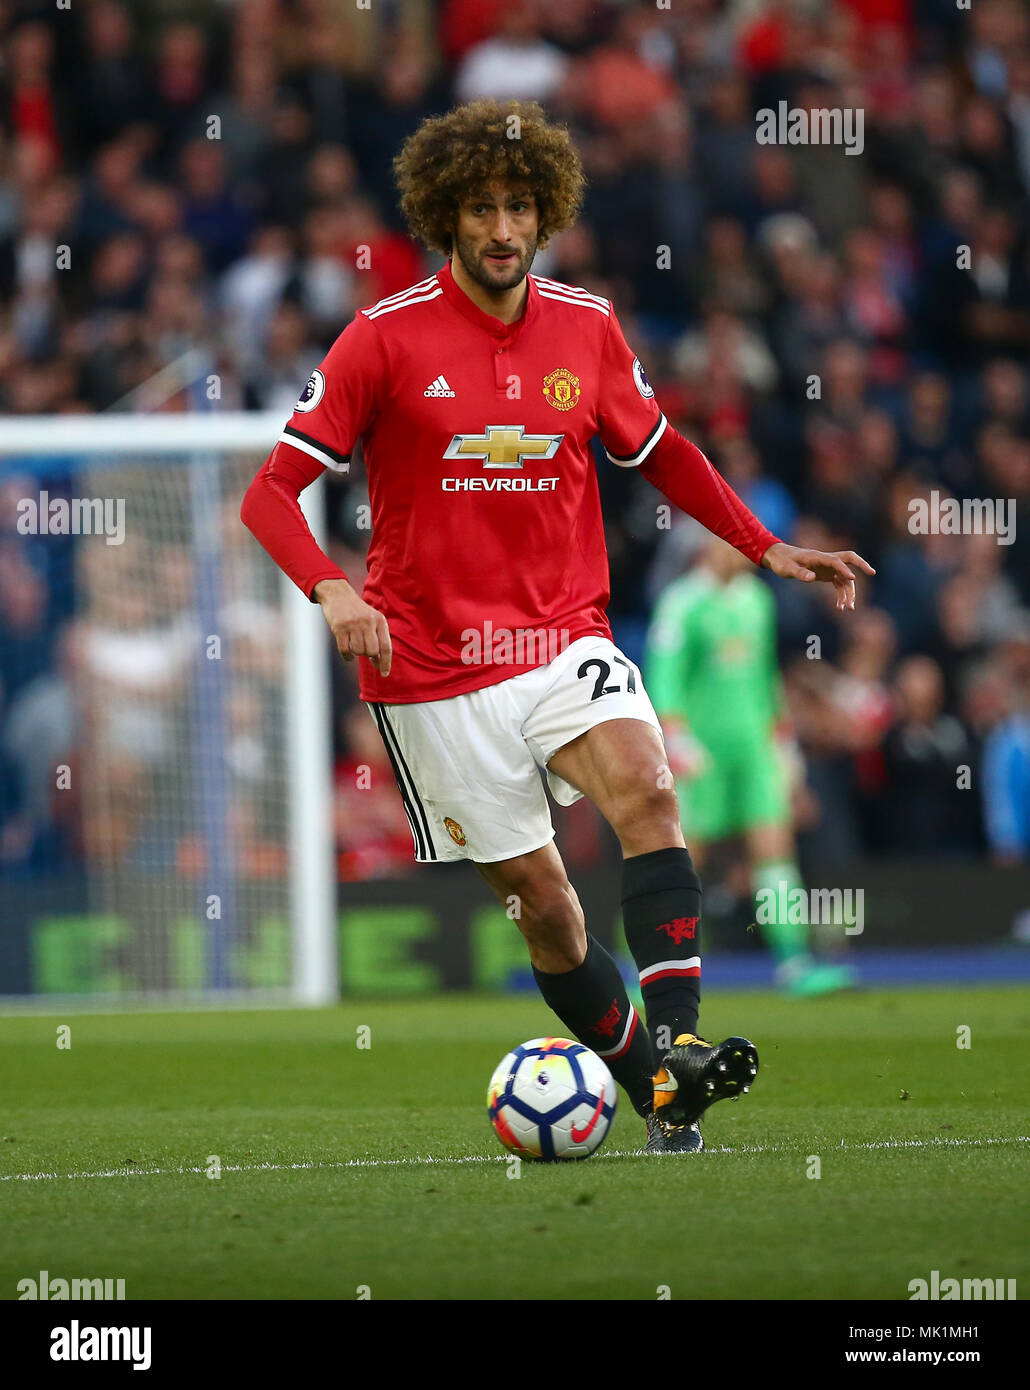 Marouane Fellaini of Manchester United  during the Premier League match between Brighton and Hove Albion and Manchester United at the American Express Community Stadium in Brighton and Hove. 04 May 2018 *** EDITORIAL USE ONLY ***  No merchandising. For Football images FA and Premier League restrictions apply inc. no internet/mobile usage without FAPL license - for details contact Football Dataco Stock Photo